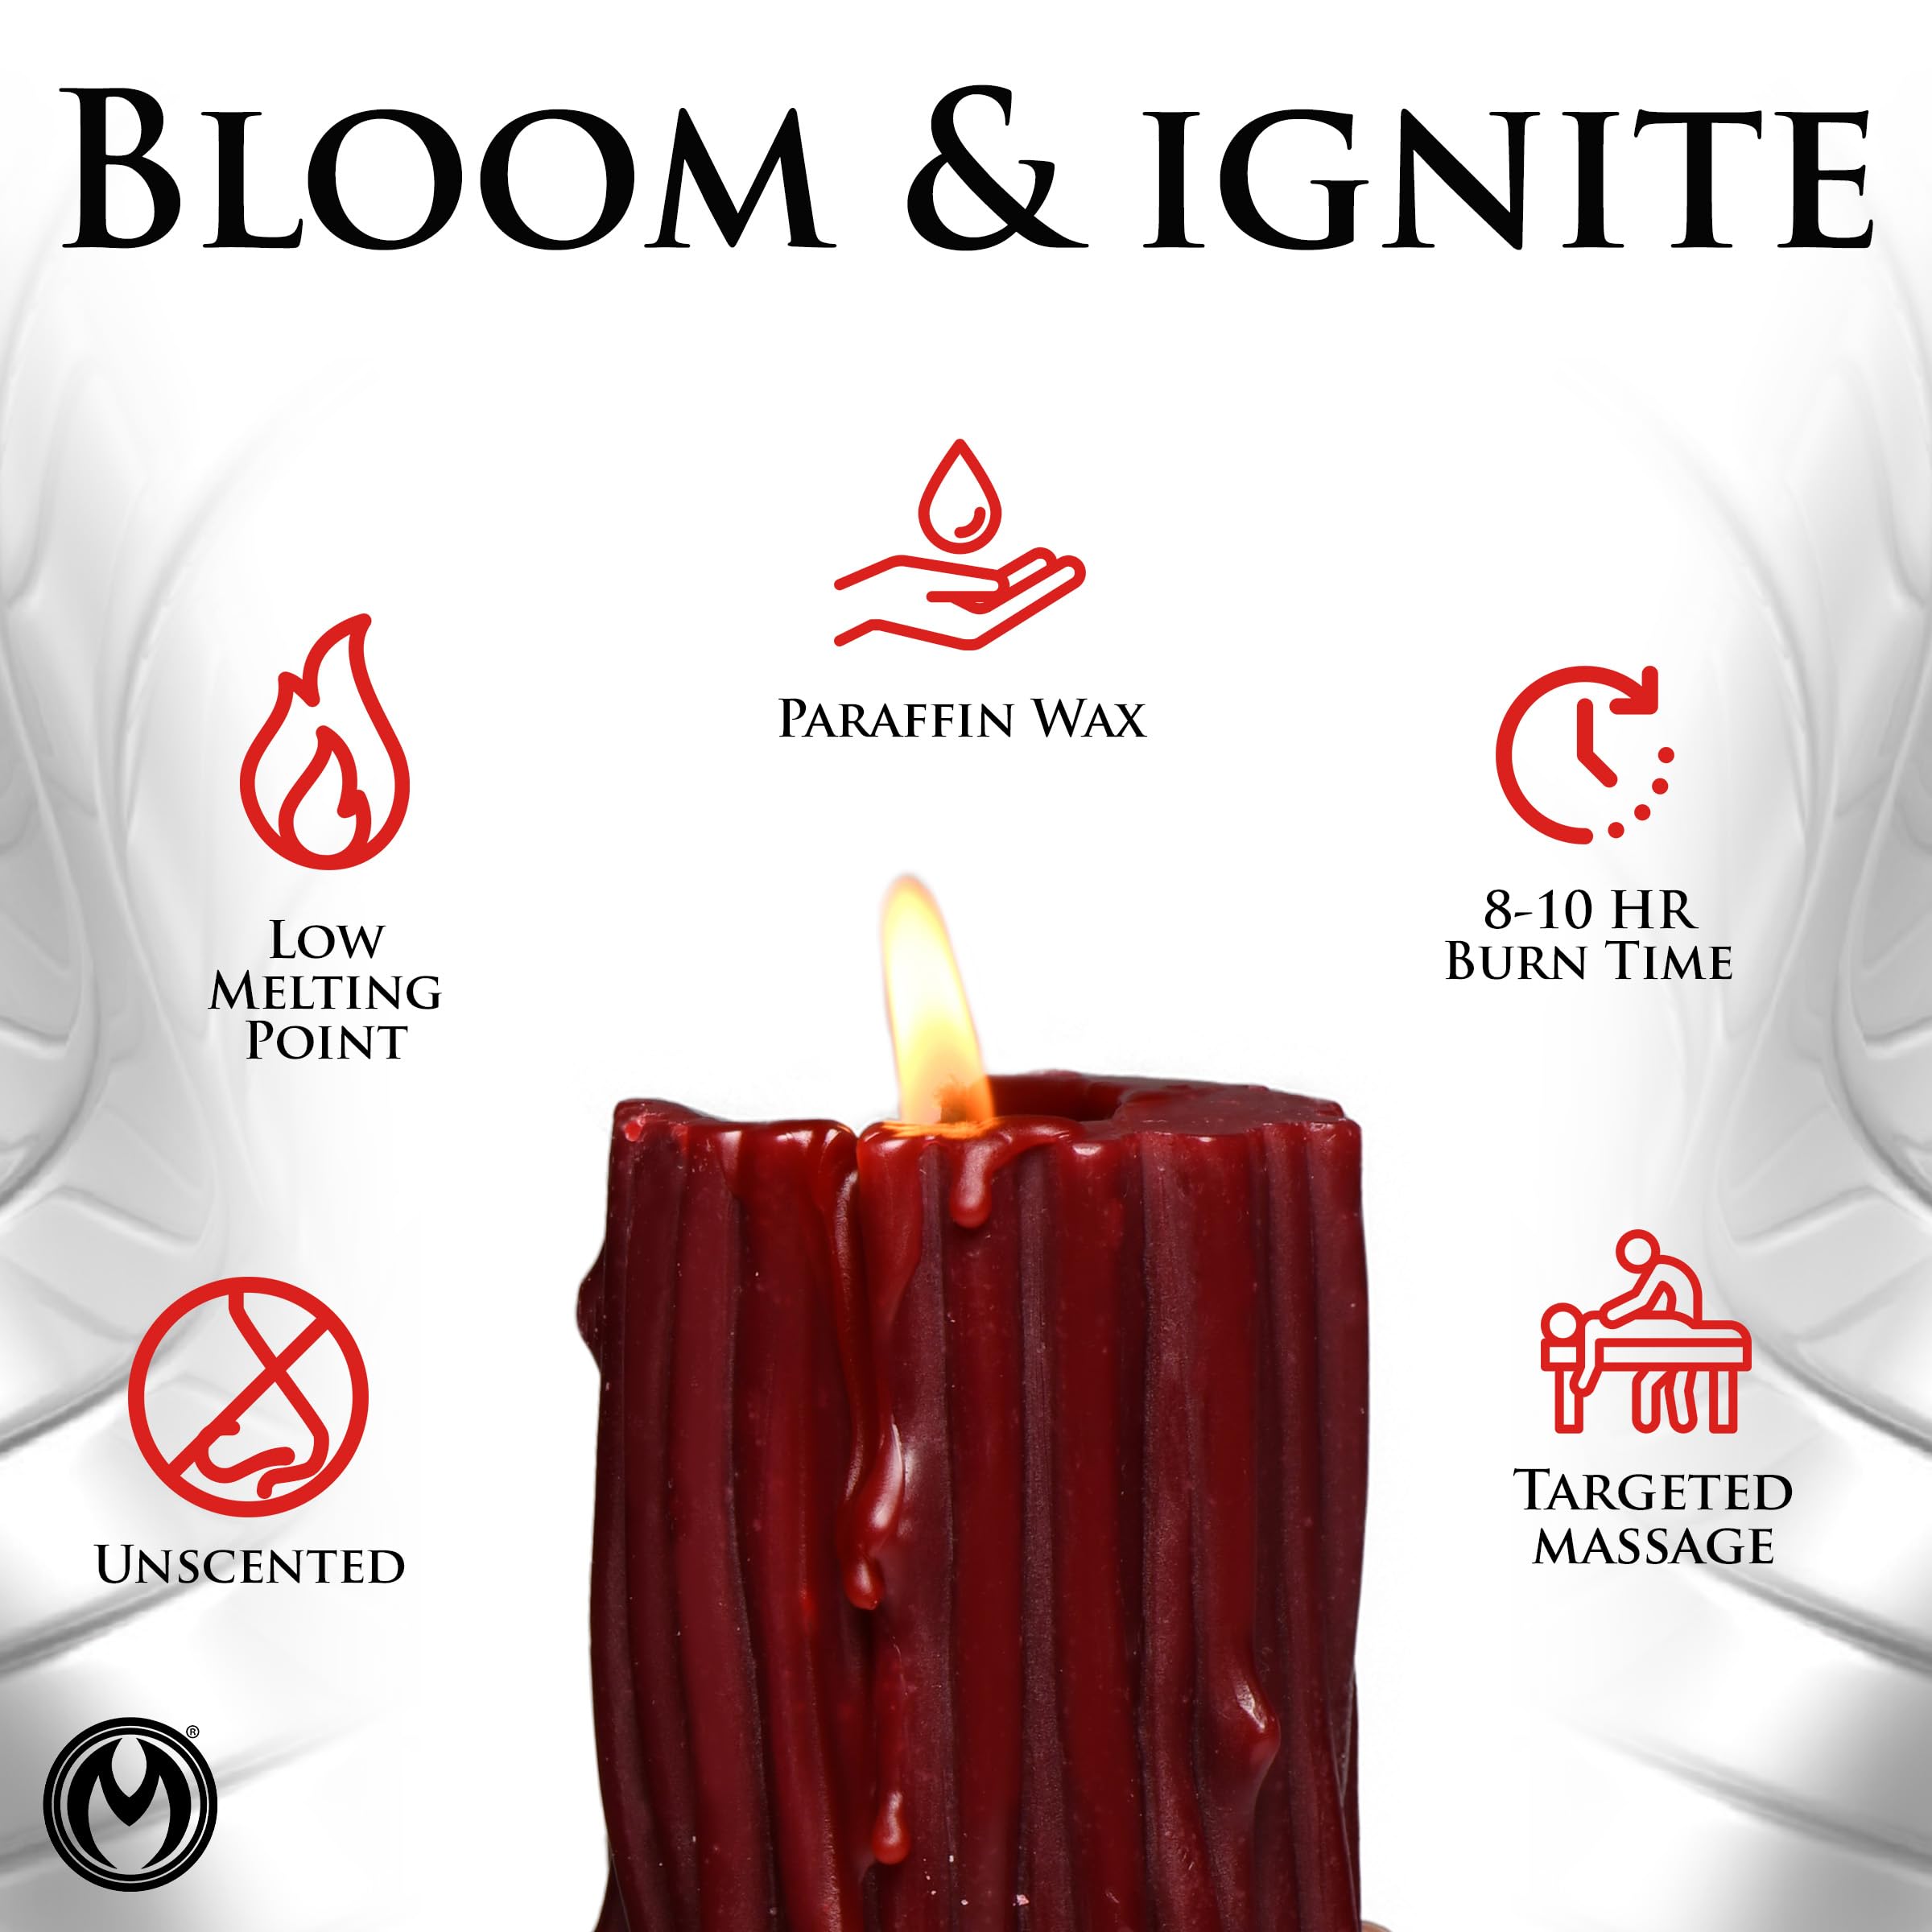 Thorn Drip Candle for Wellness and Relaxation & Romantic Candle Massage. Low Melting Point. Unscented Paraffin Body Wax. Perfect Spa Gift for Self-Care. 1 Piece, Red.